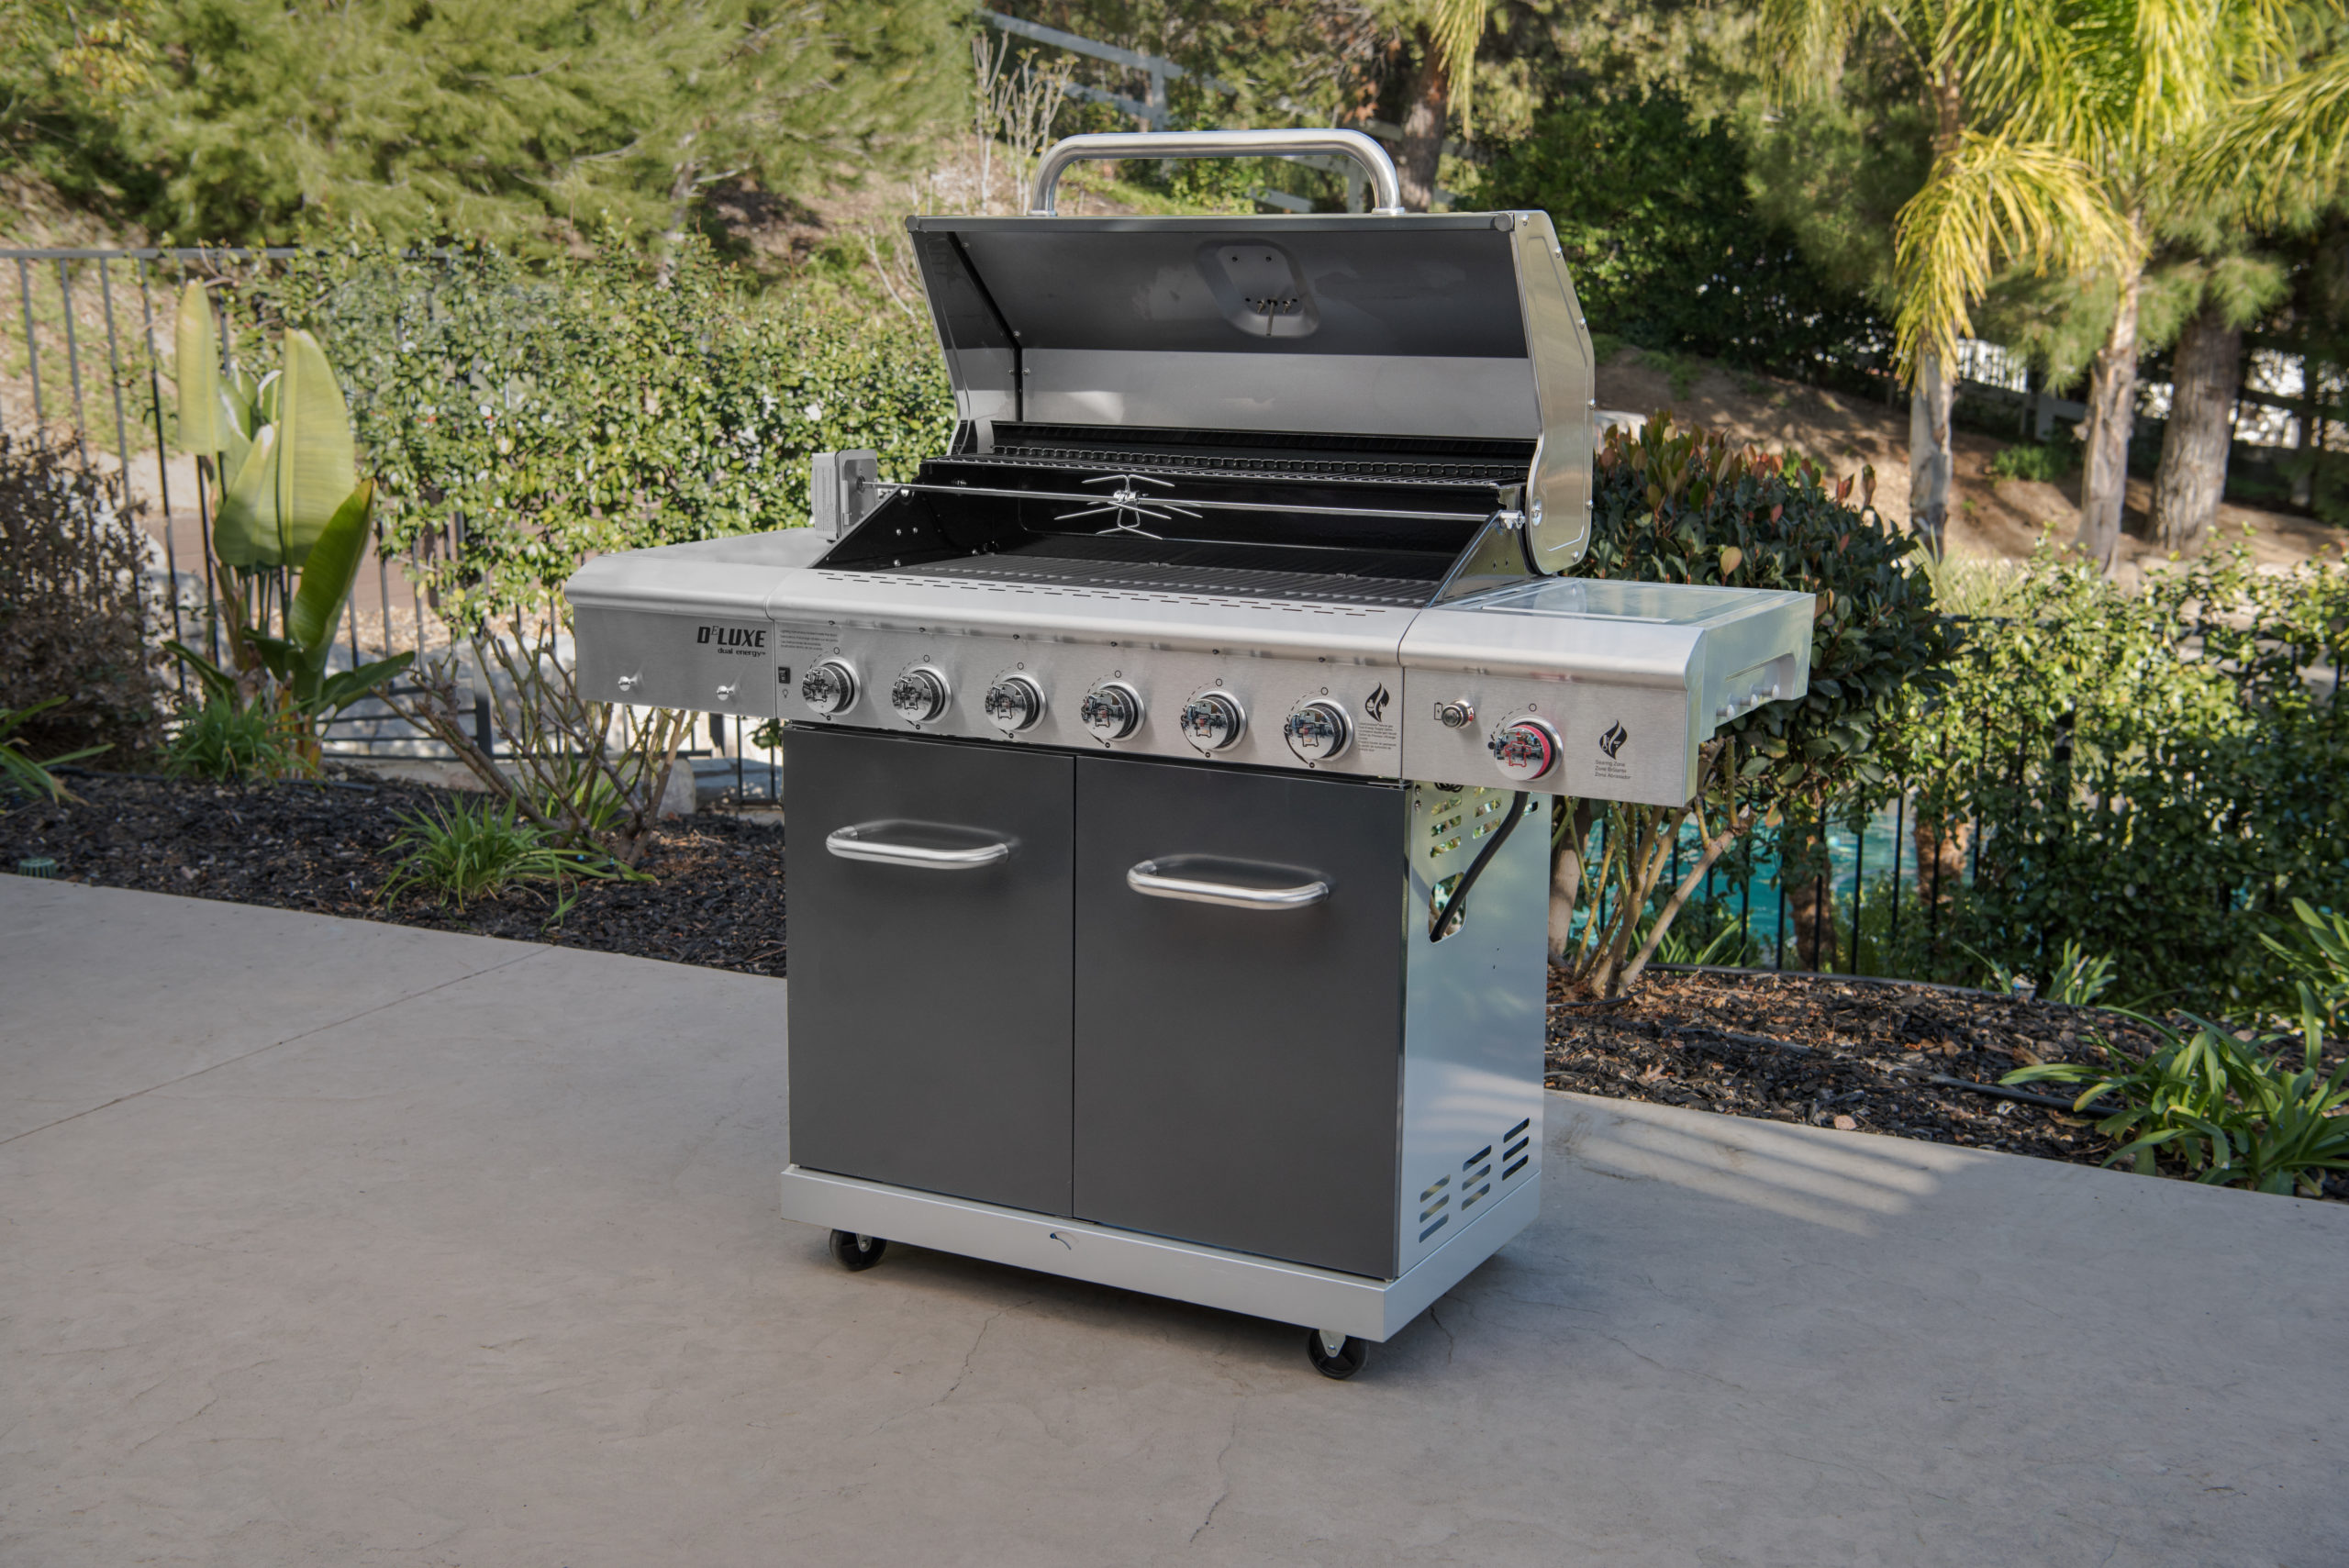 Credit Nexgrill For Deluxe 6 Burner Propane Gas Grill2 1 Scaled